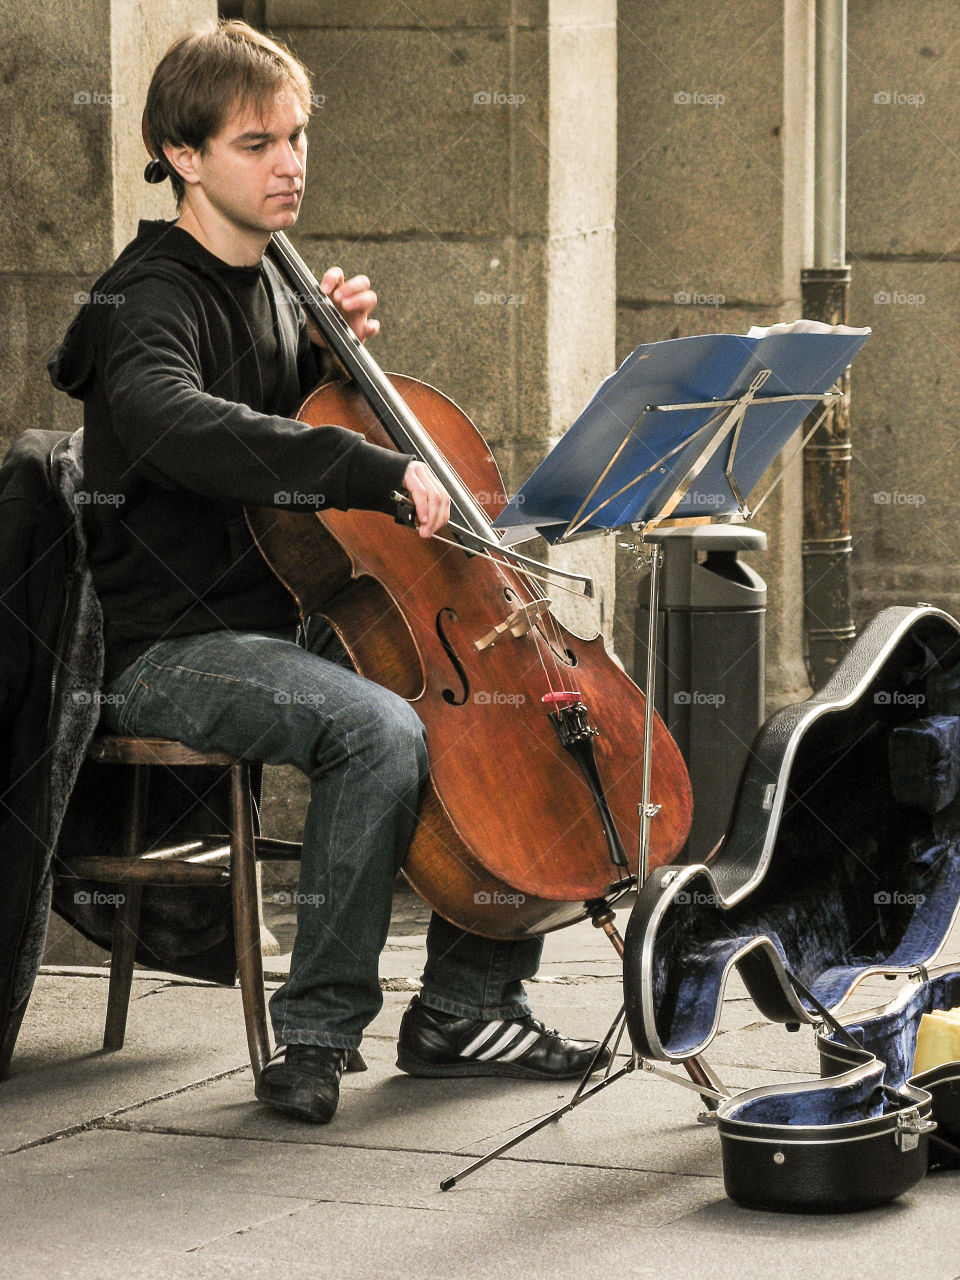 Street musician playing cello